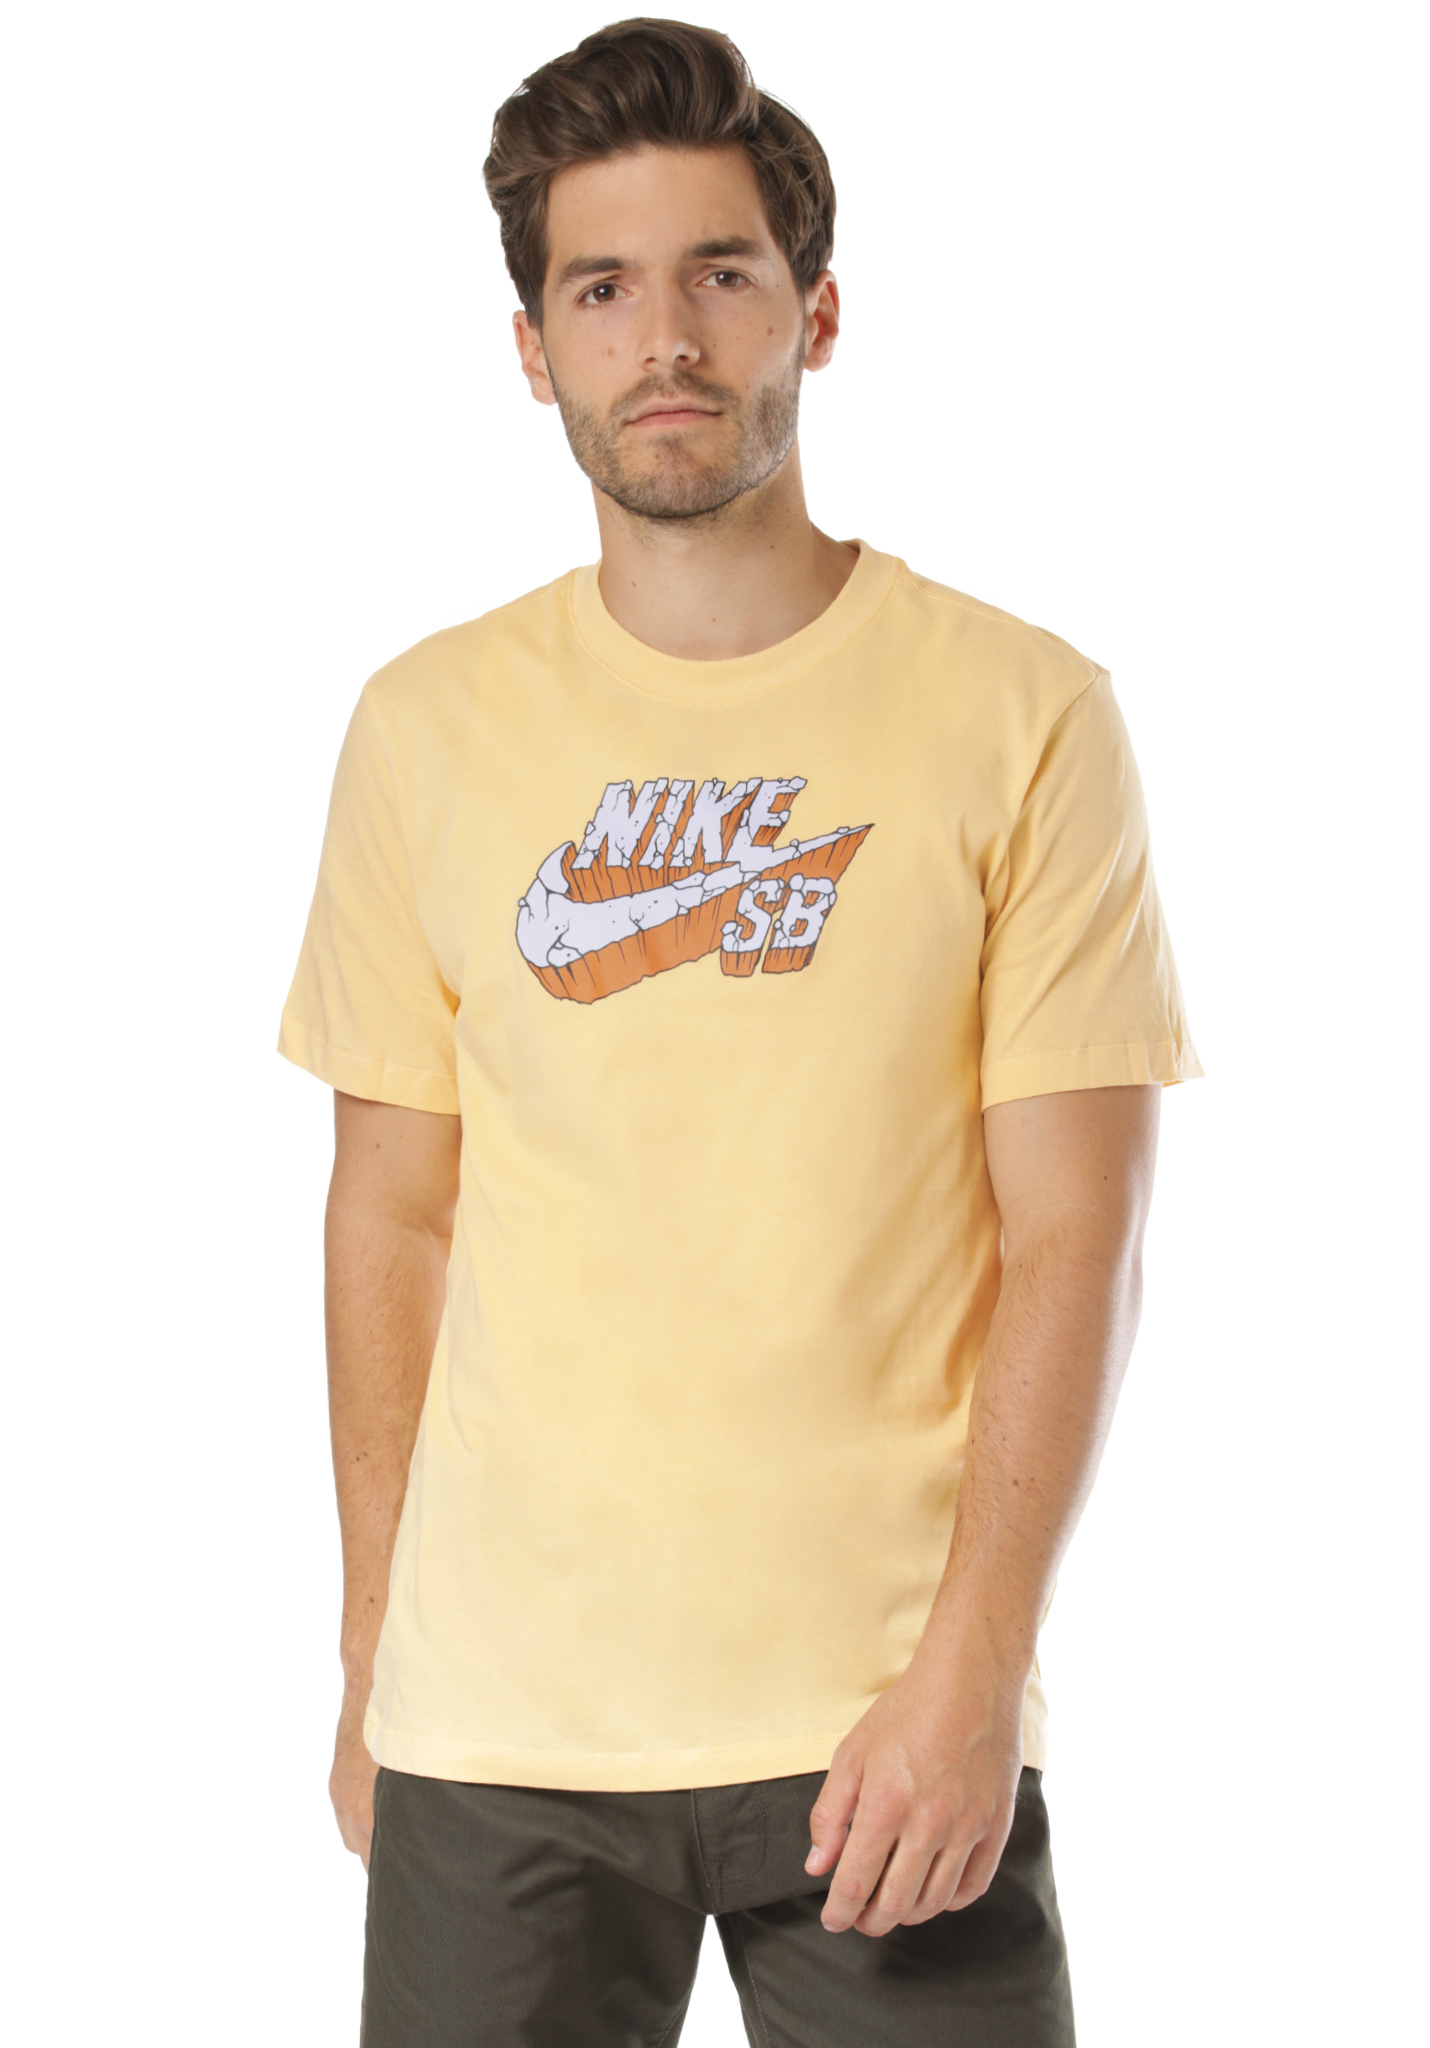 Nike Snowboarding Concrete T-Shirt himmlisches gold S